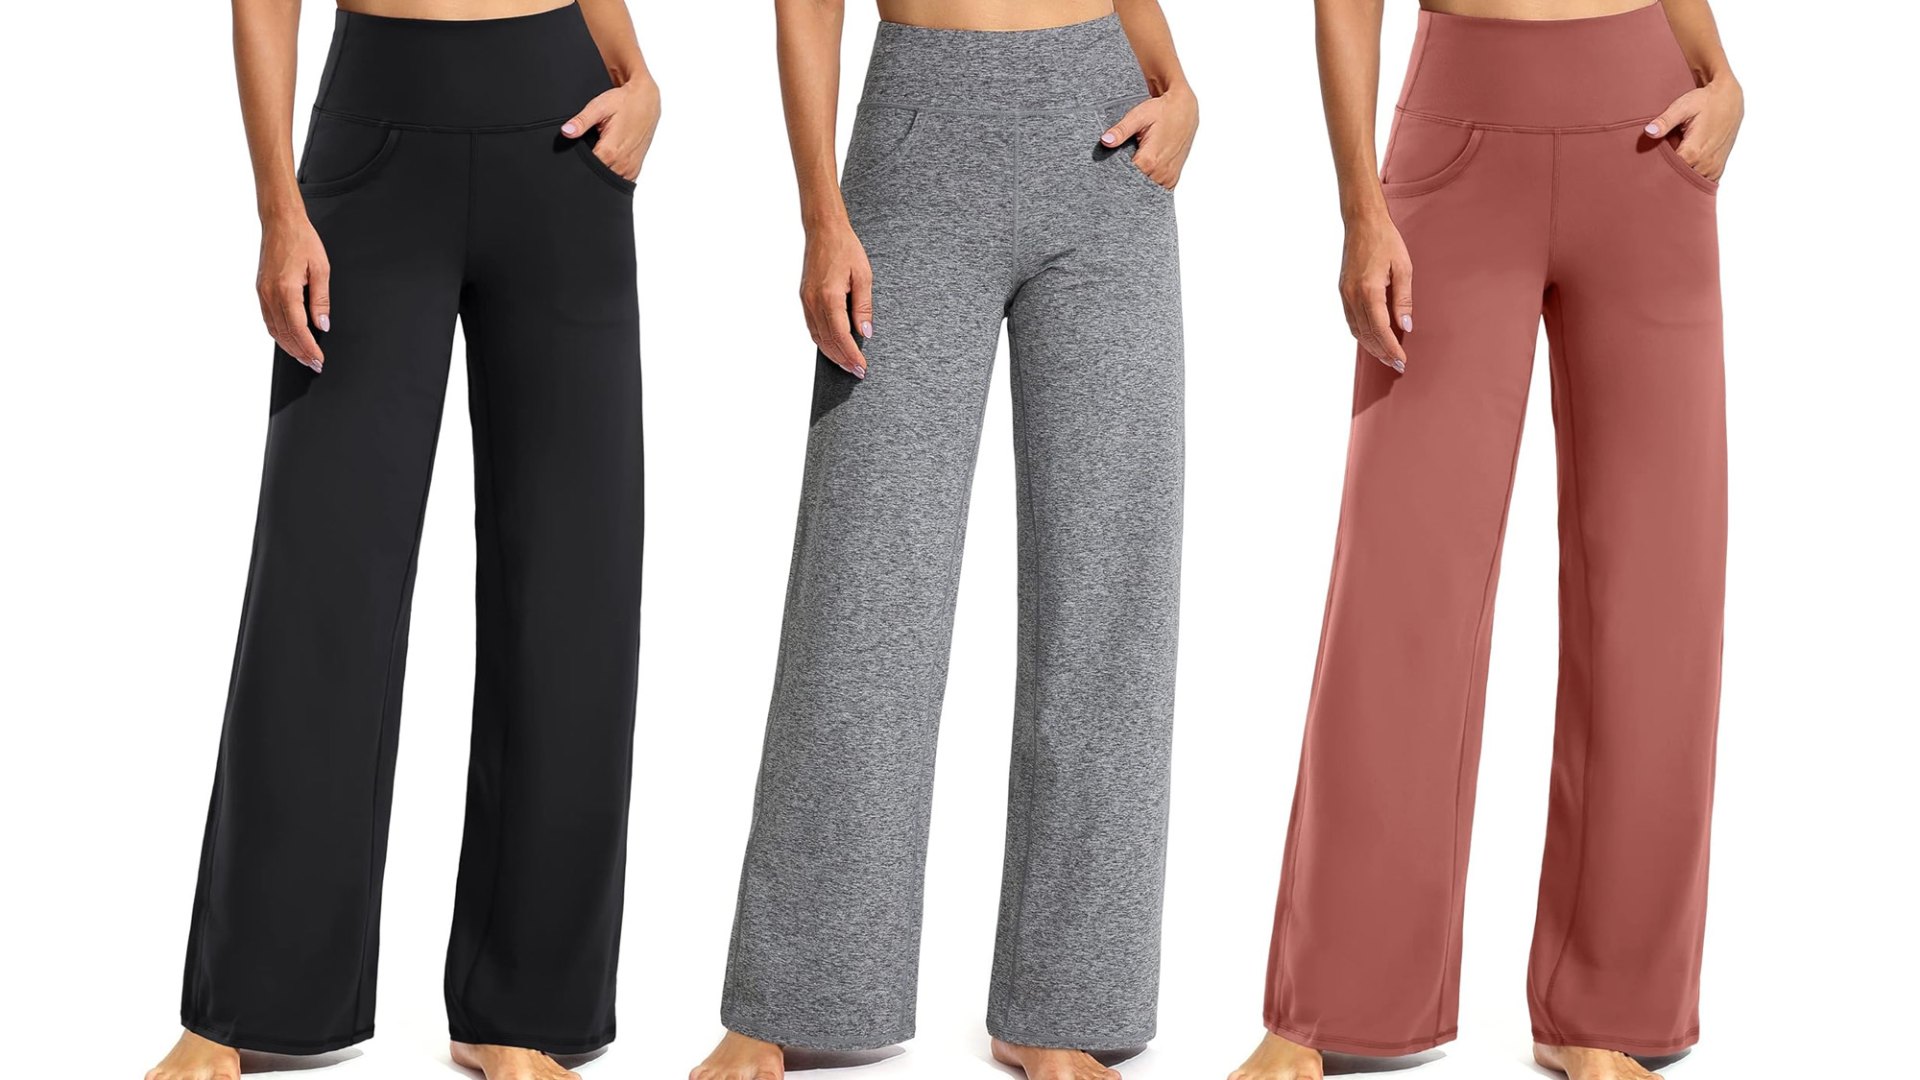 I Bought 4 More Pairs of These Comfy and Slimming Yoga Pants | Us Weekly